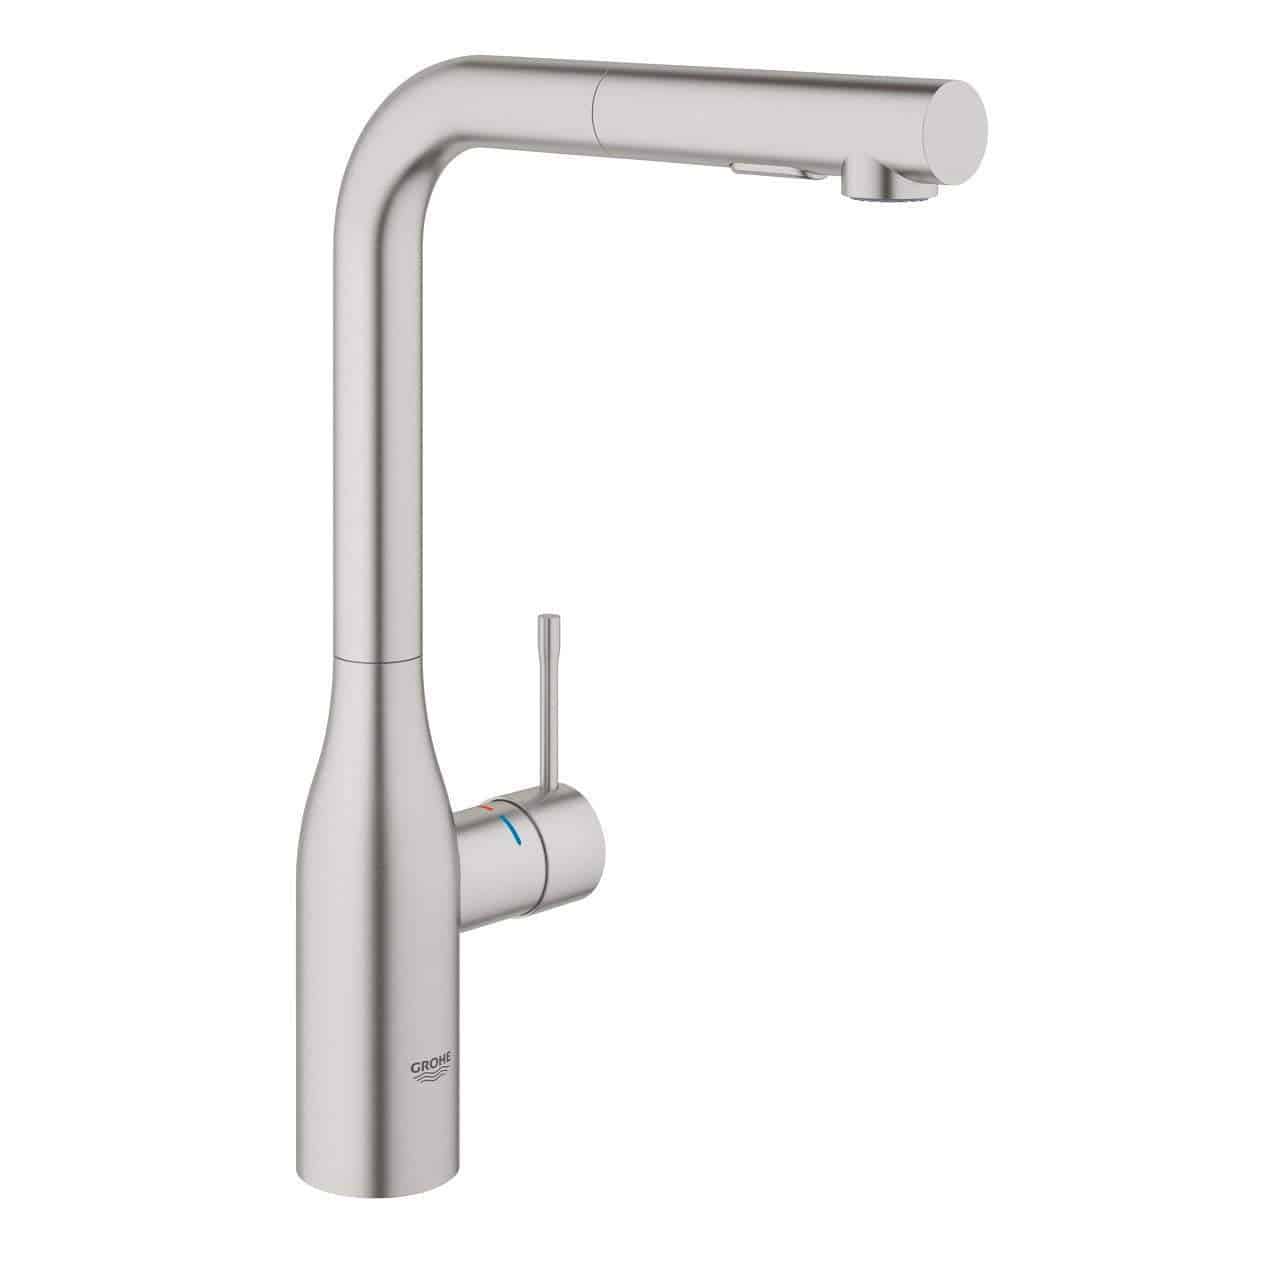 Essence 廚房單把手龍頭 Kitchen Single-Lever Sink Mixer-Grohe-30270DC0-Home Manner